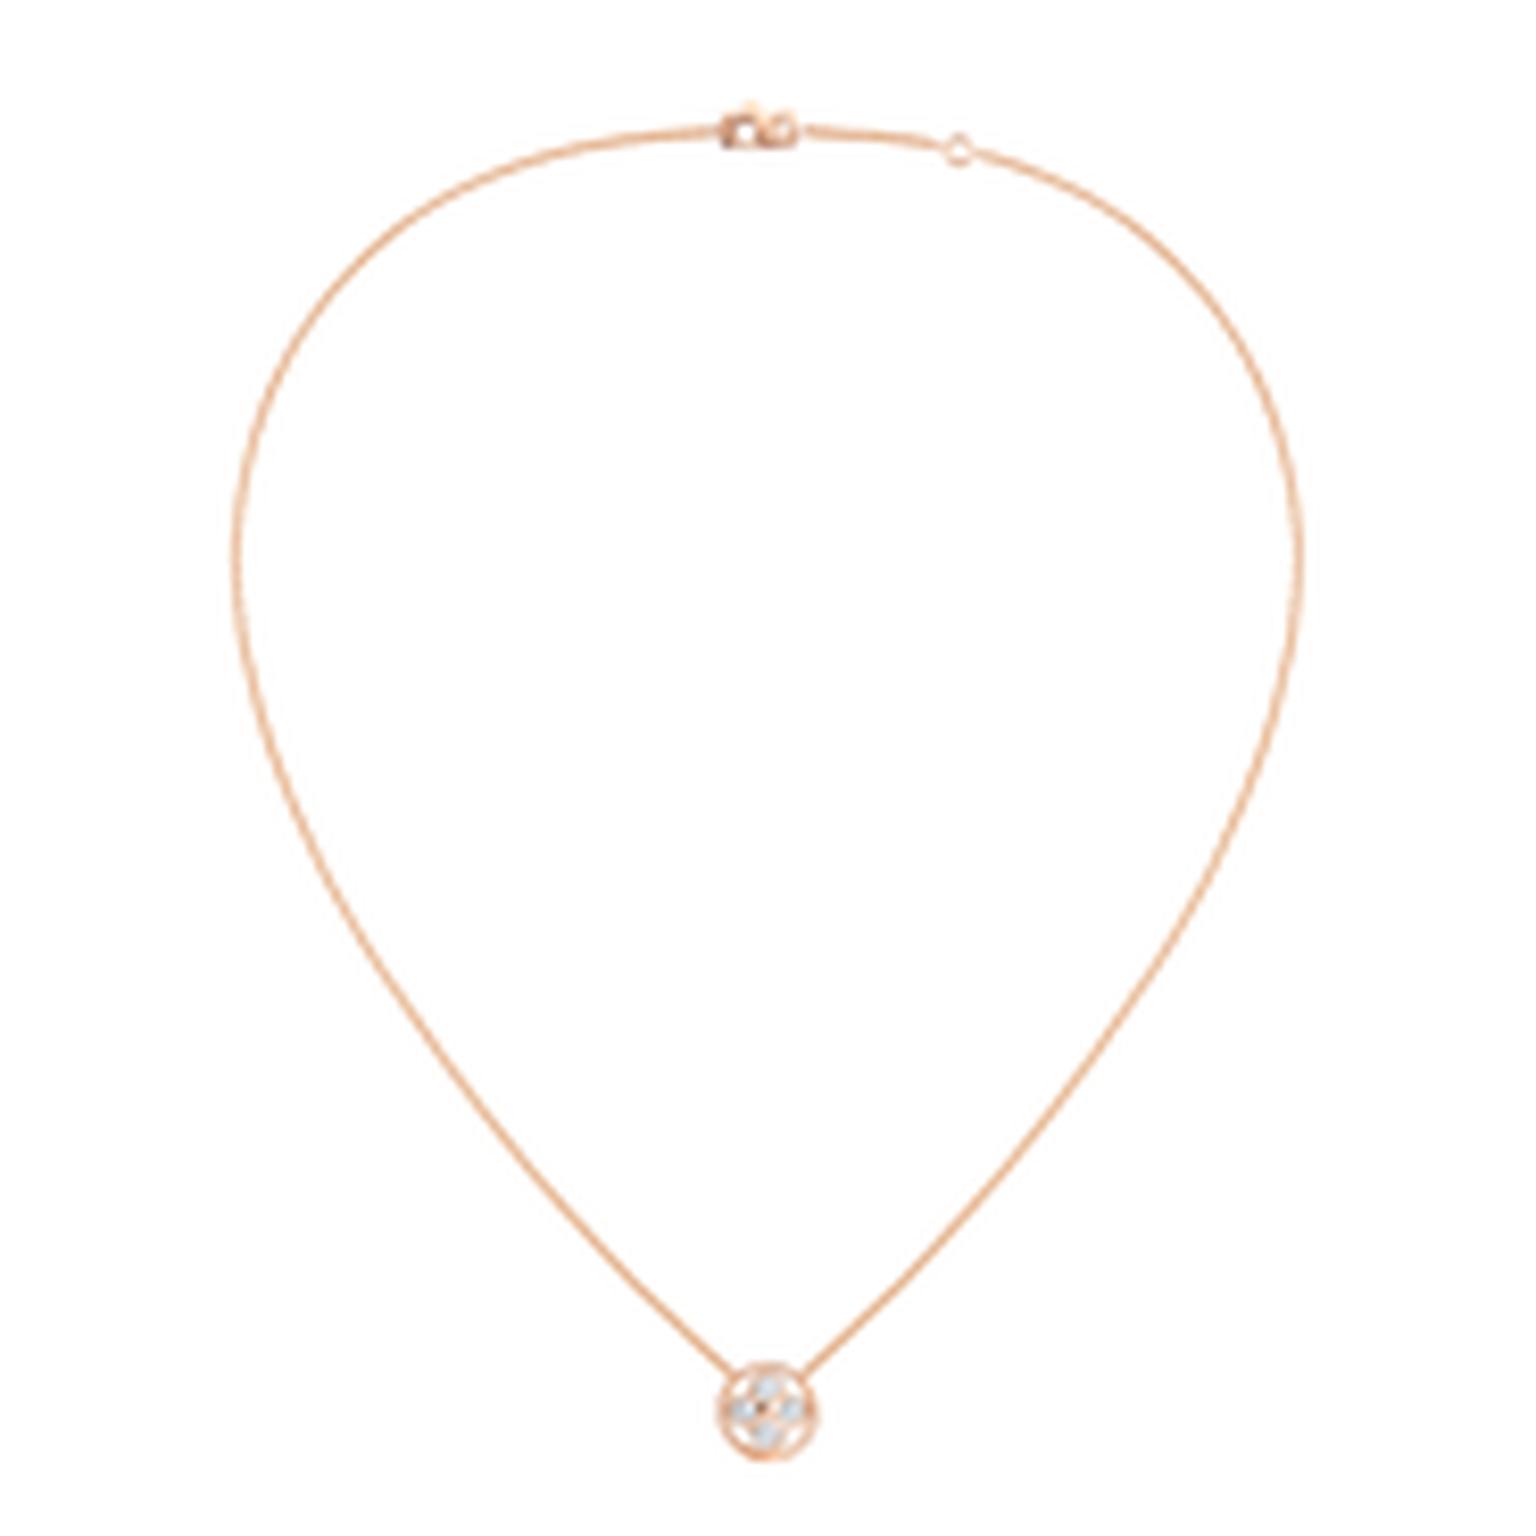 Louis Vuitton Monogram Sun and Stars collection Sun pendant necklace in rose gold_thumb